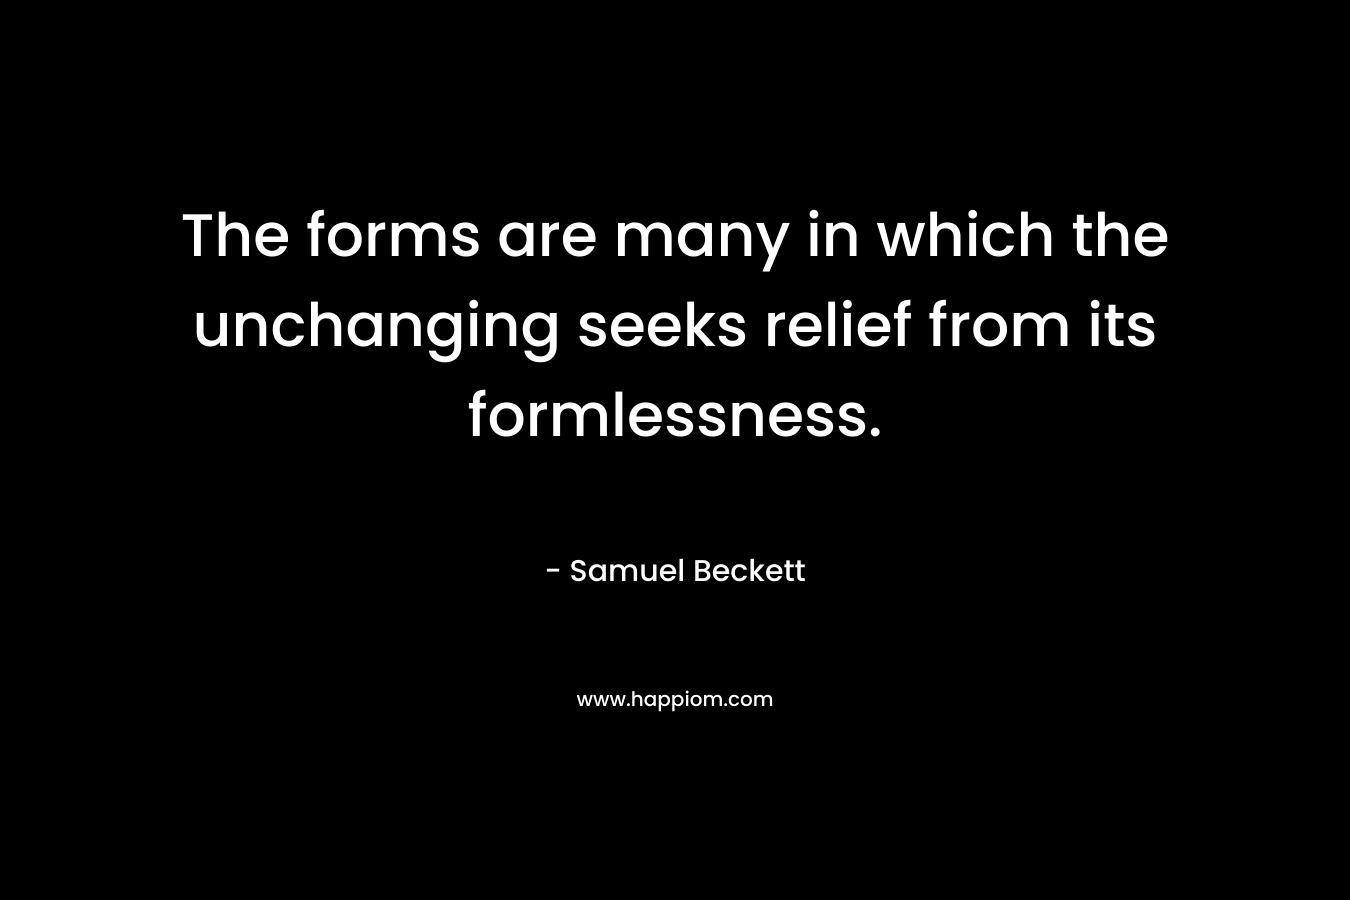 The forms are many in which the unchanging seeks relief from its formlessness.